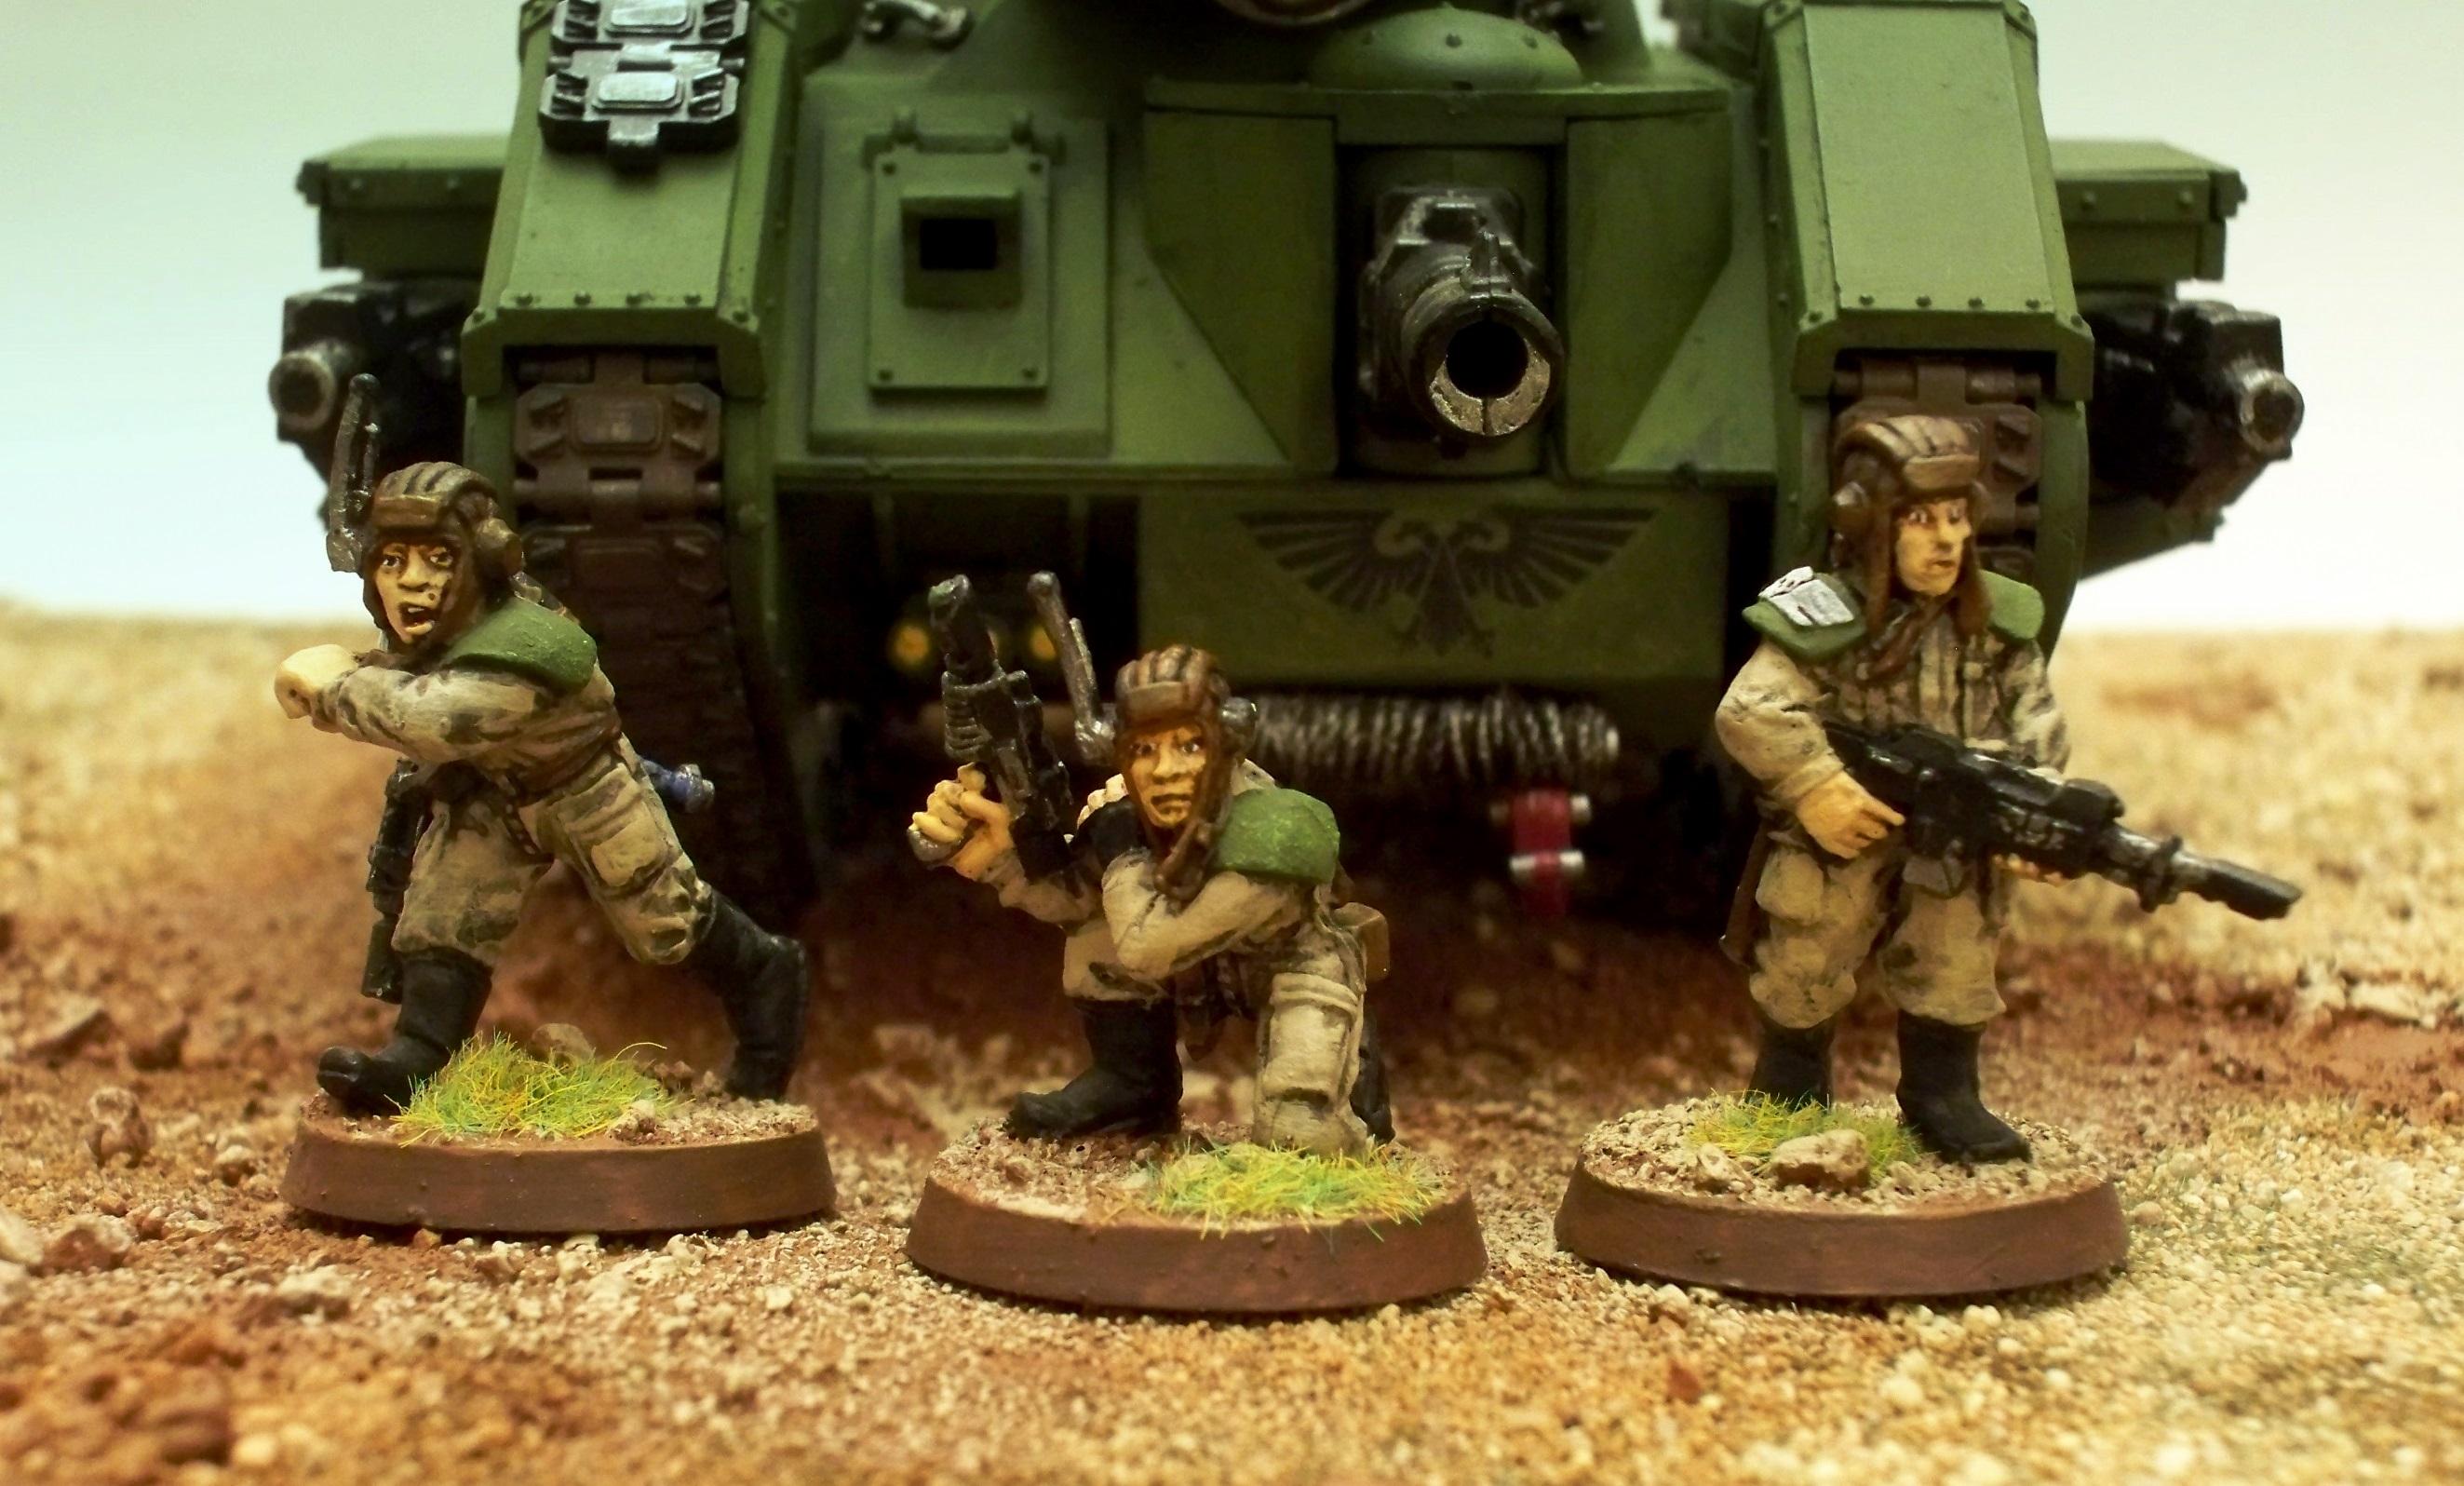 Imperial, Imperial Guard, Tank Crew, Warhammer 40,000